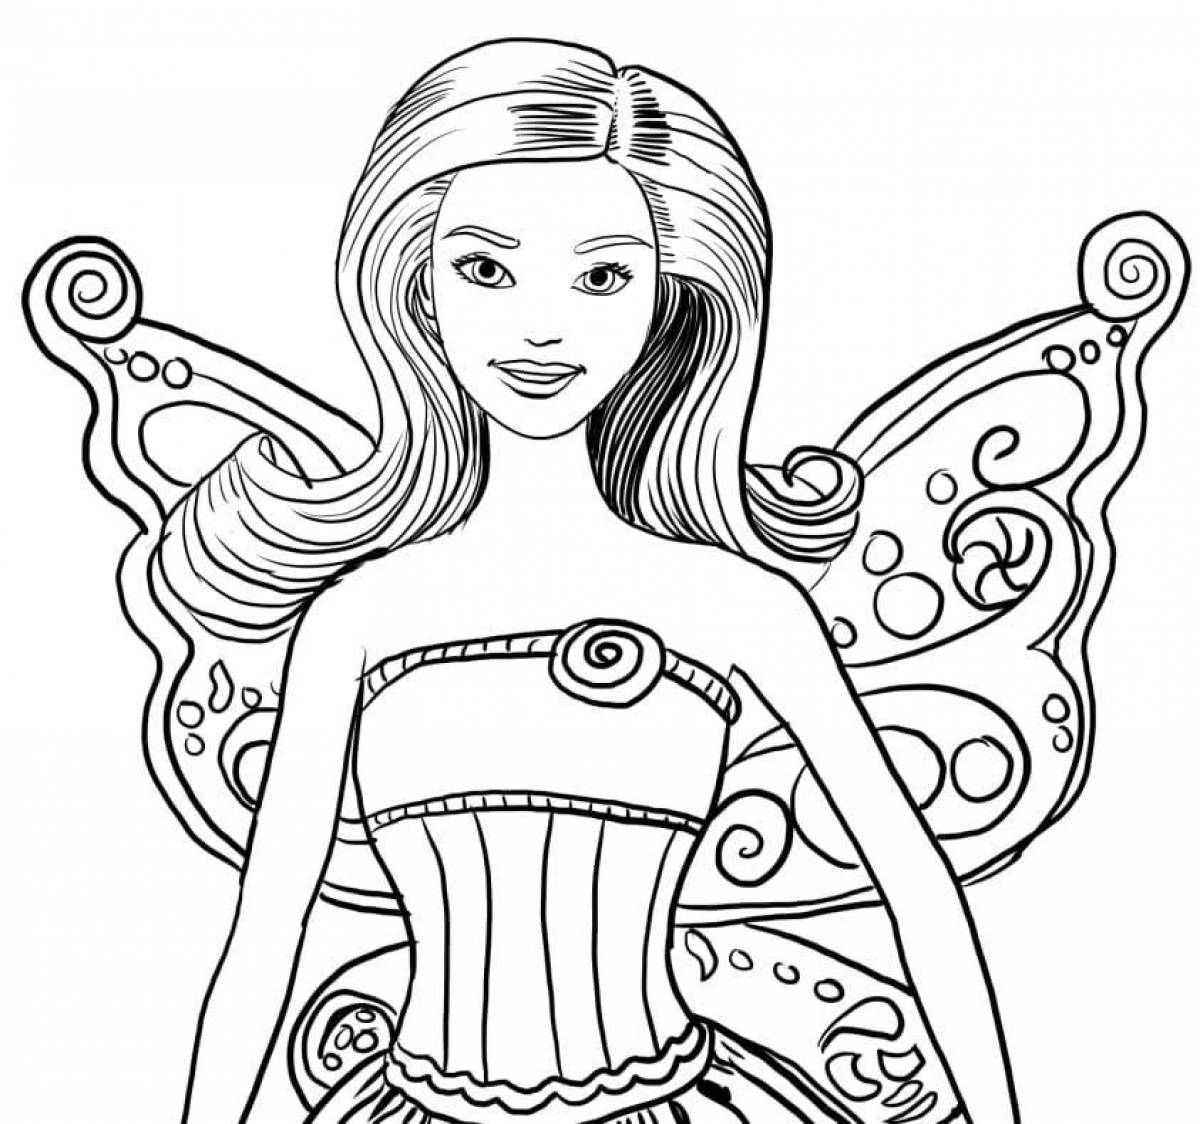 Beautiful barbie doll coloring book for kids